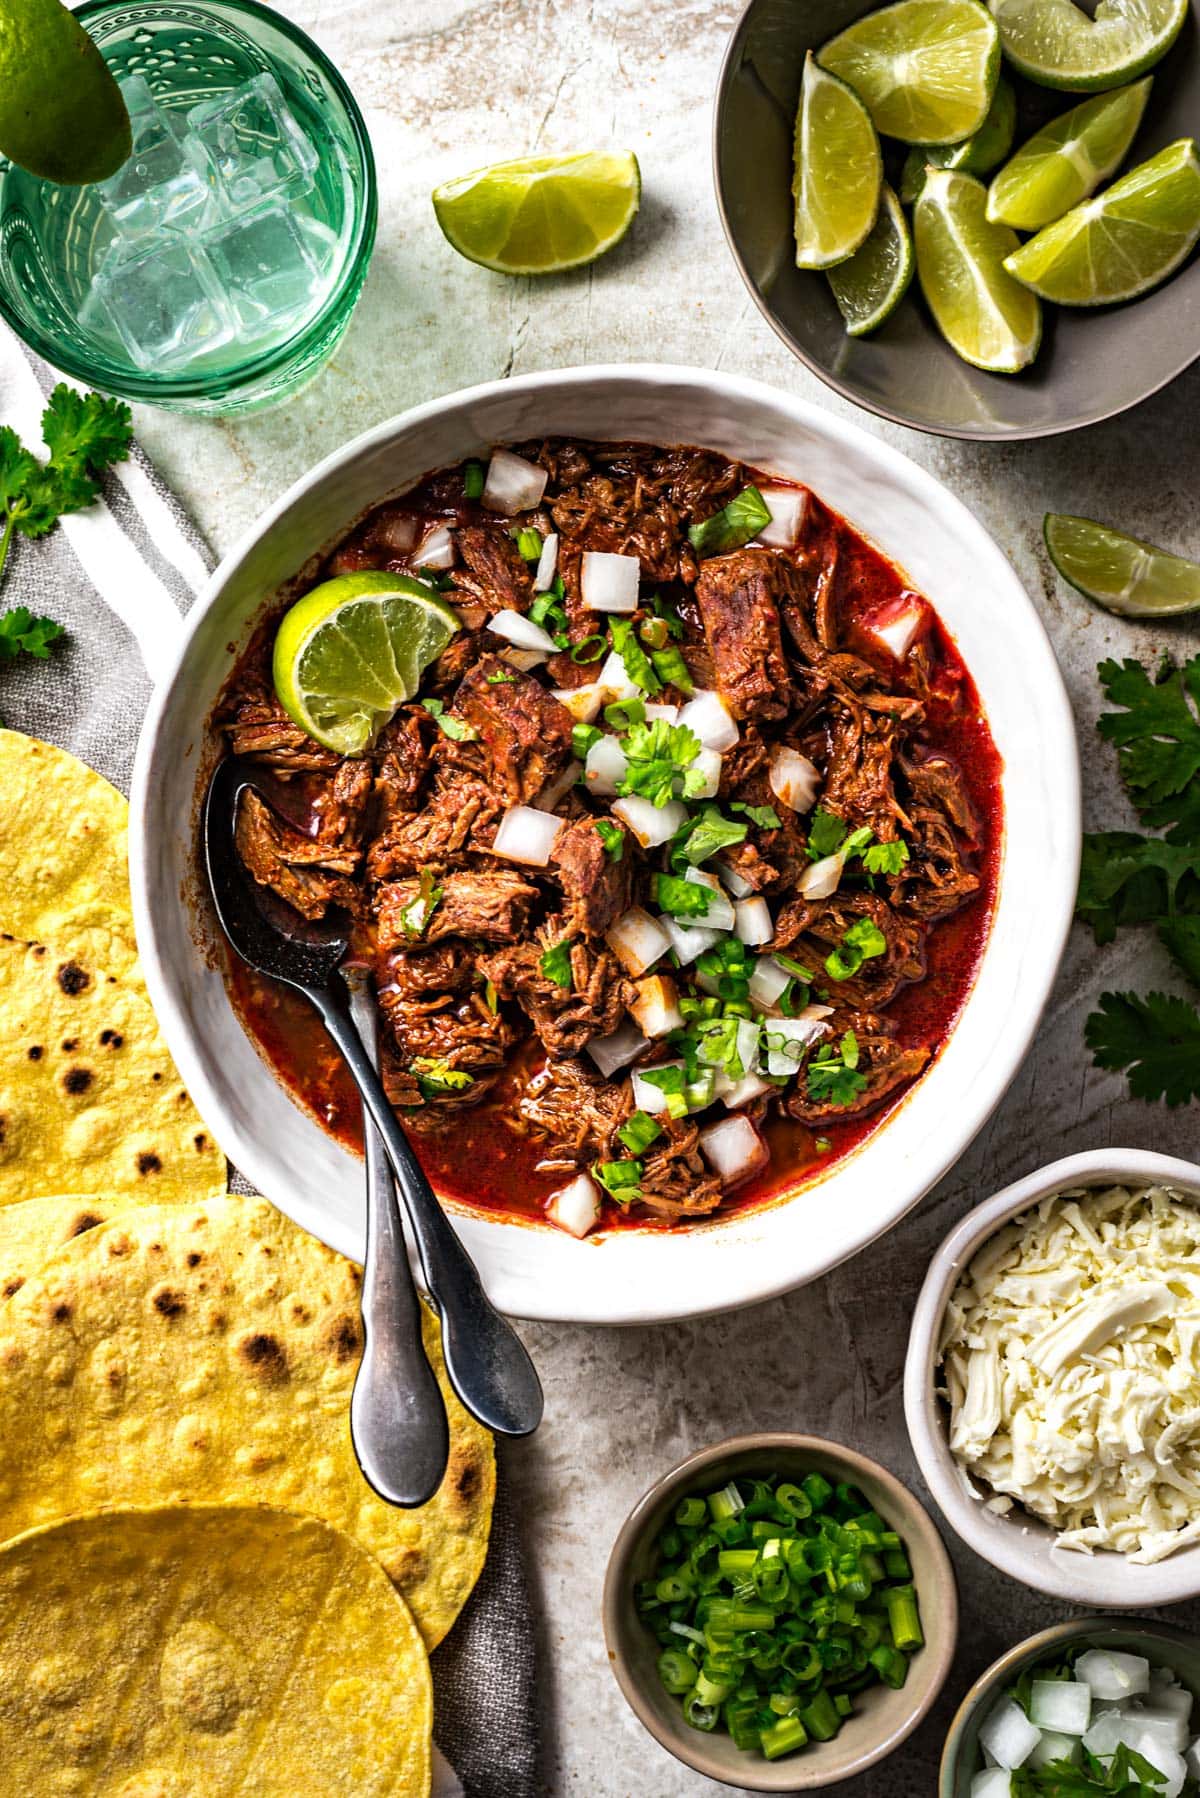 A bowl of birria de res surrounded by oaxaca cheese, limes, and toasted corn tortillas